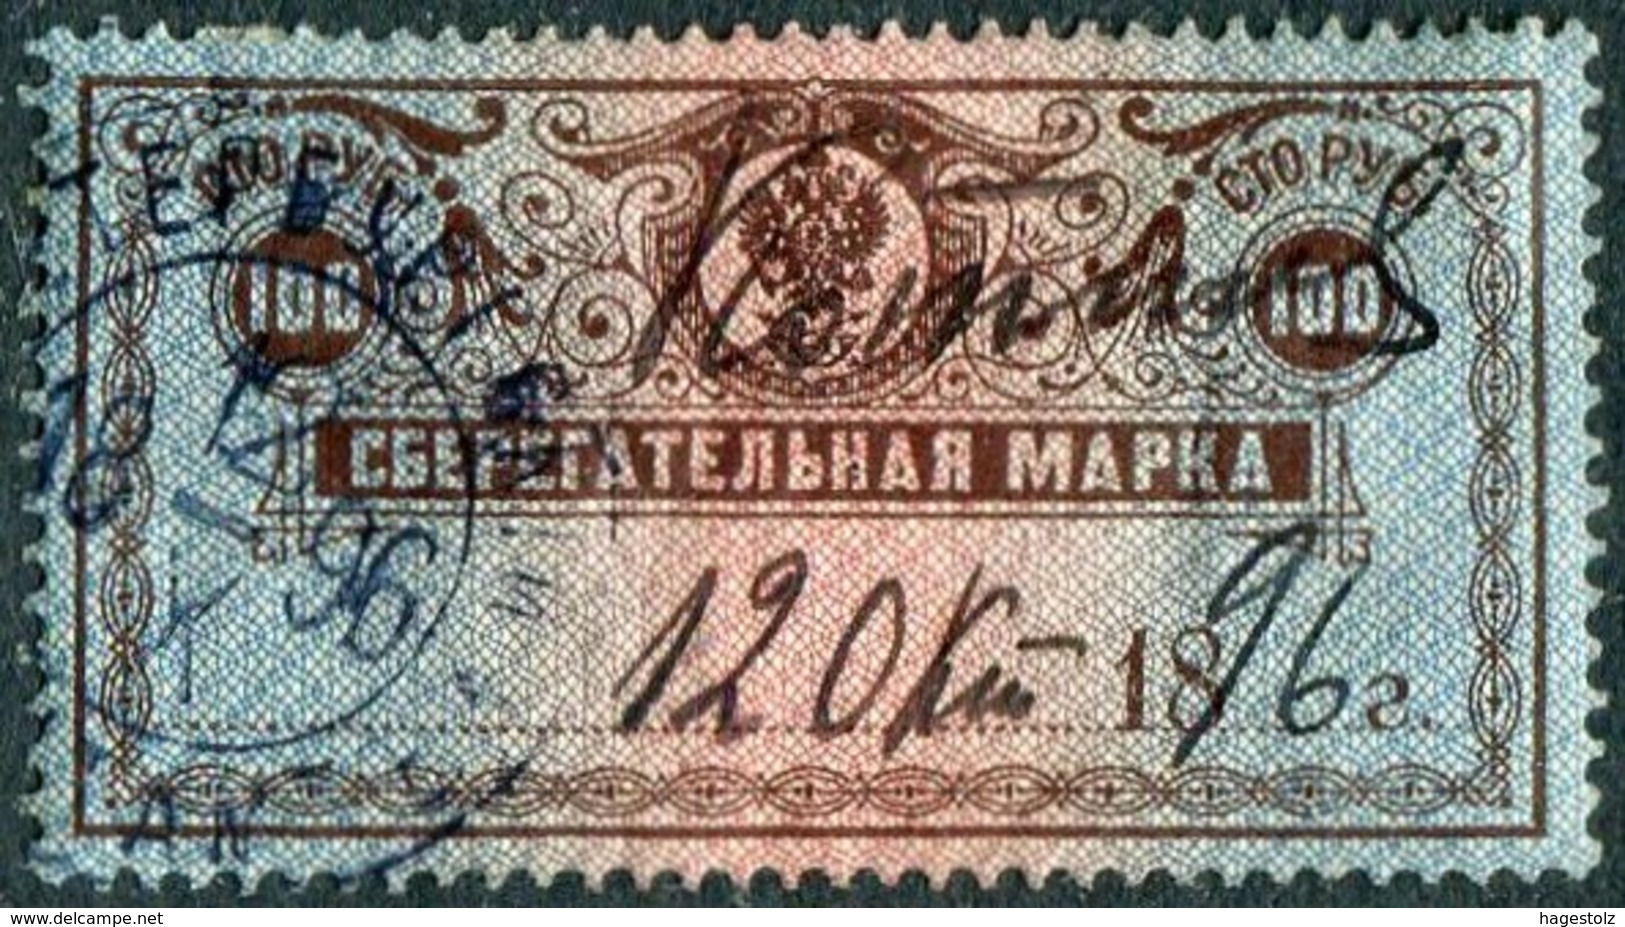 Russia Russland Russie 1890 Control Savings Revenue Fiscal Sparmarke Timbre D'épargne 100 Rub. Used St. Petersburg 1896 - Revenue Stamps